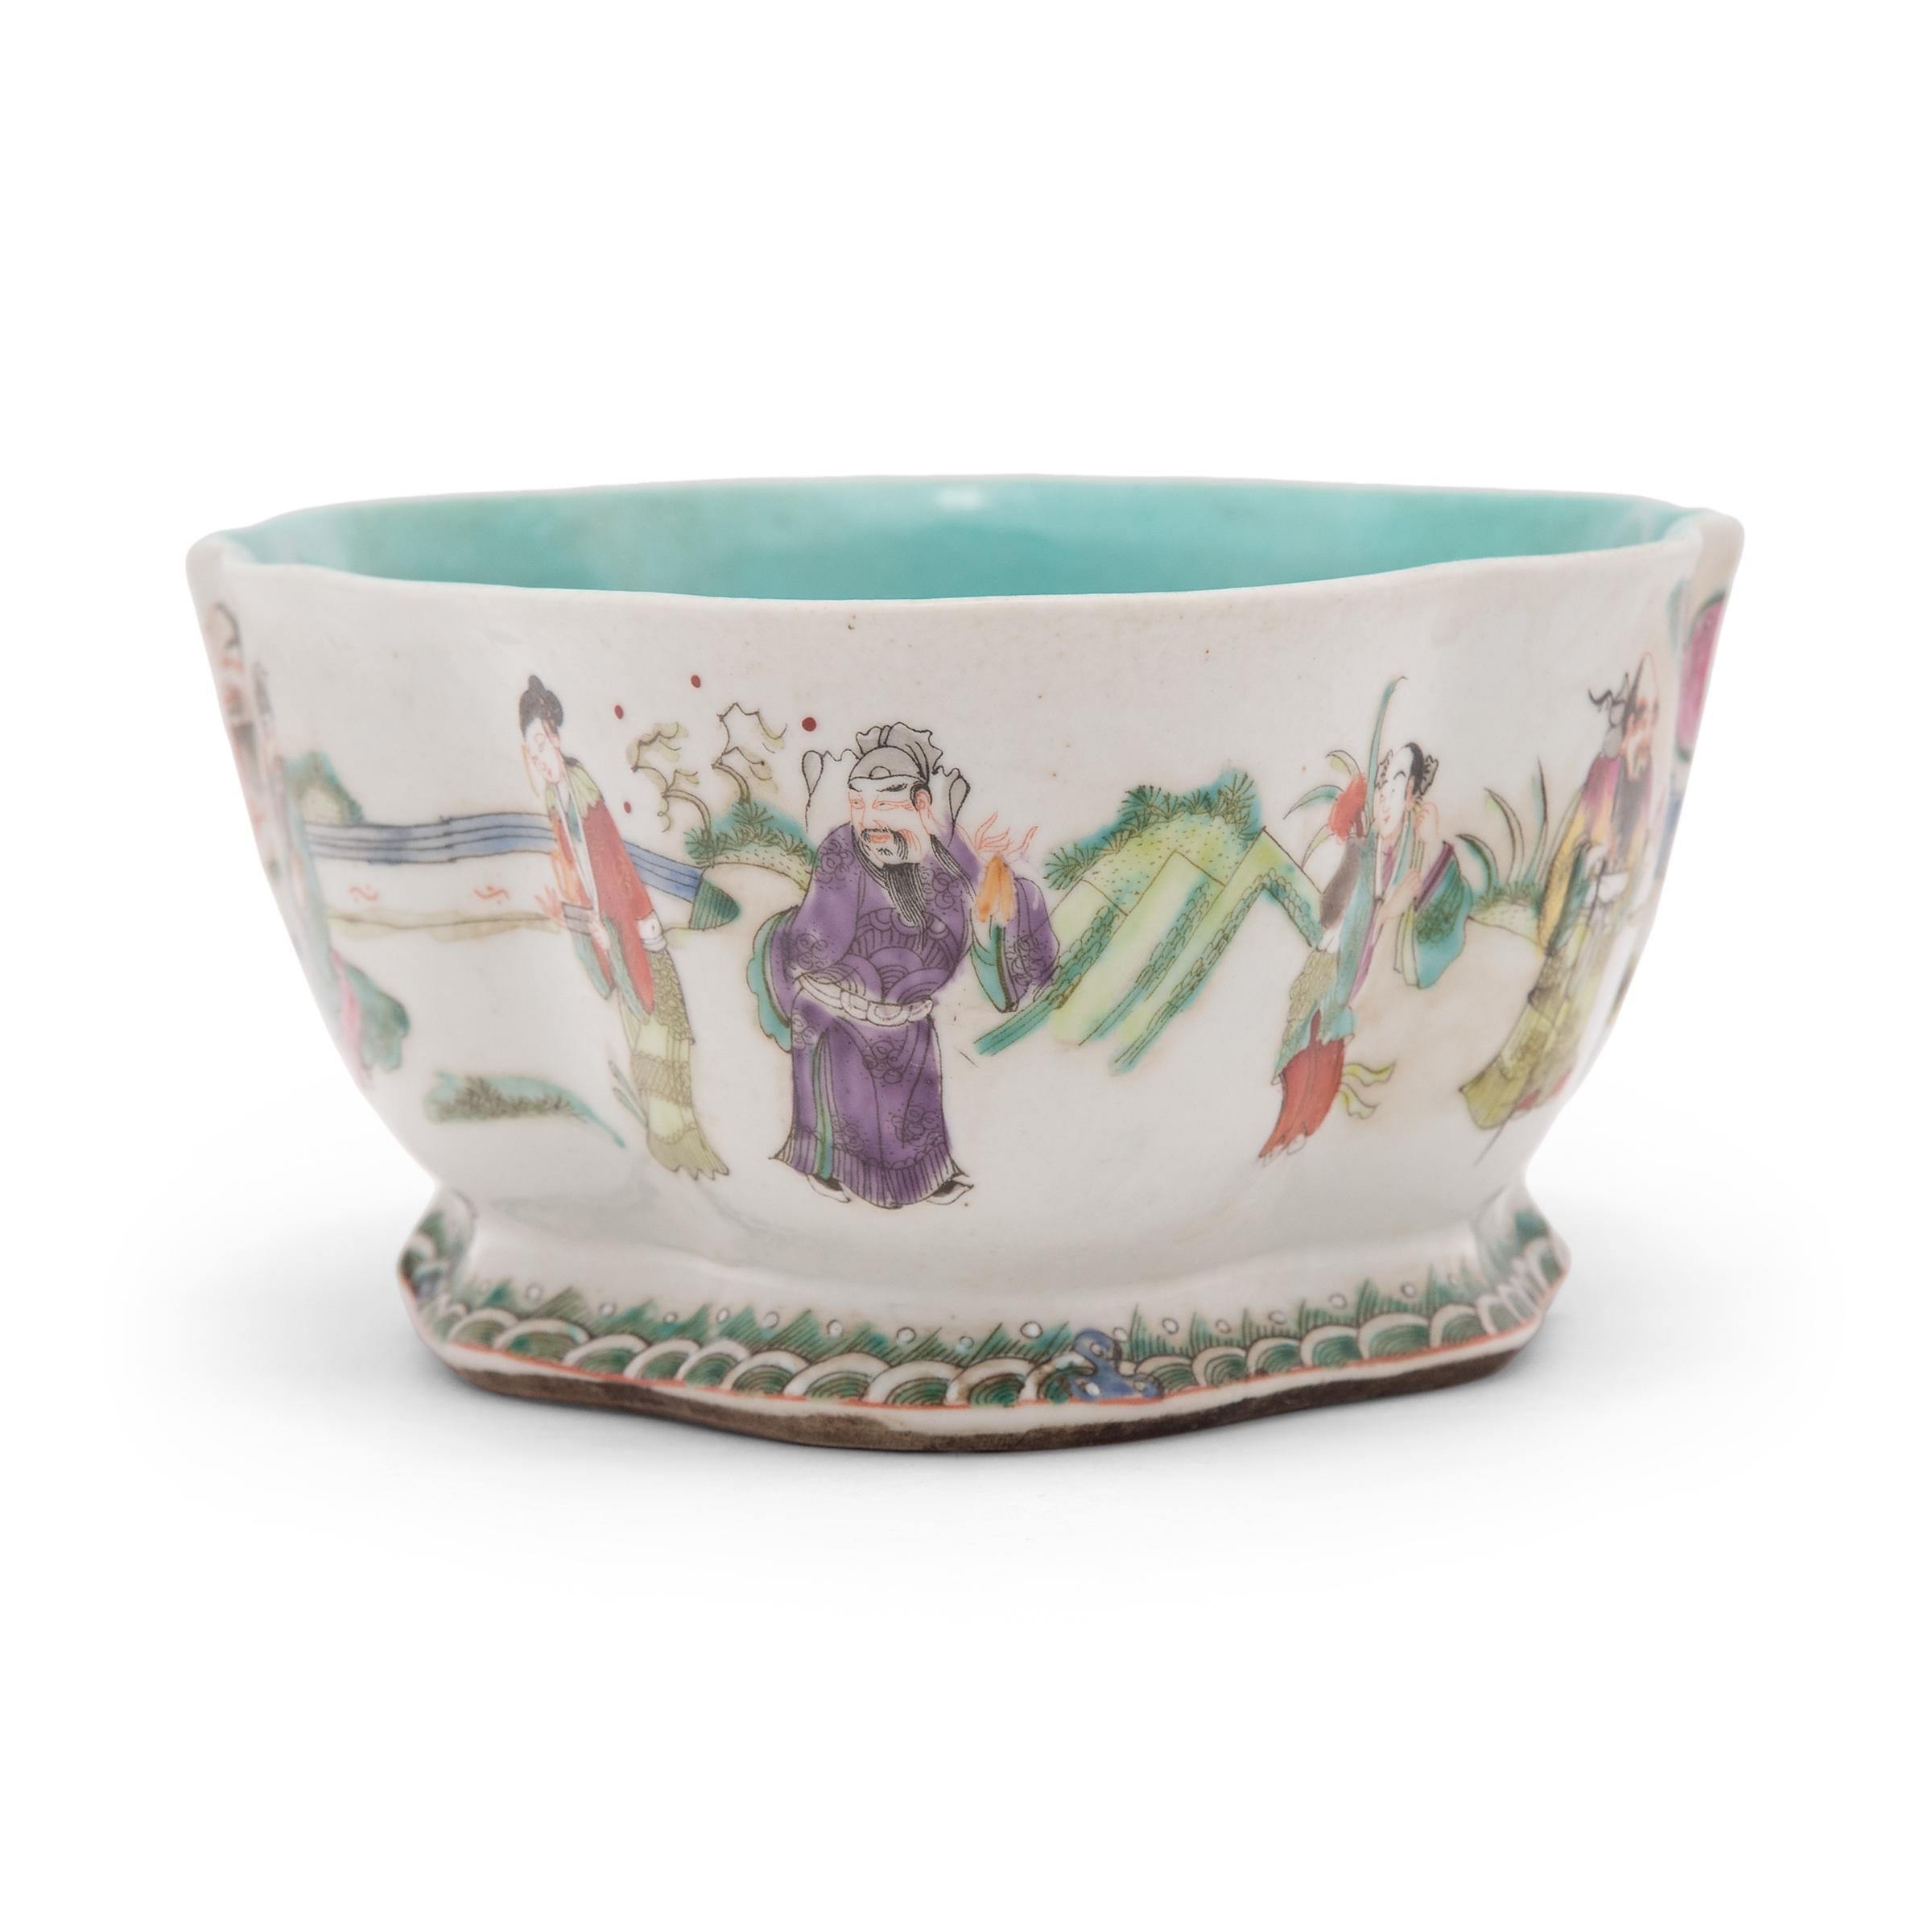 This colorful porcelain bowl dates to c. 1900 and was originally used as a serving dish for ritual offerings, placed before a home altar and piled high with fruit, baked goods, and other foods. The cartouche-shaped dish features tall sides, a short